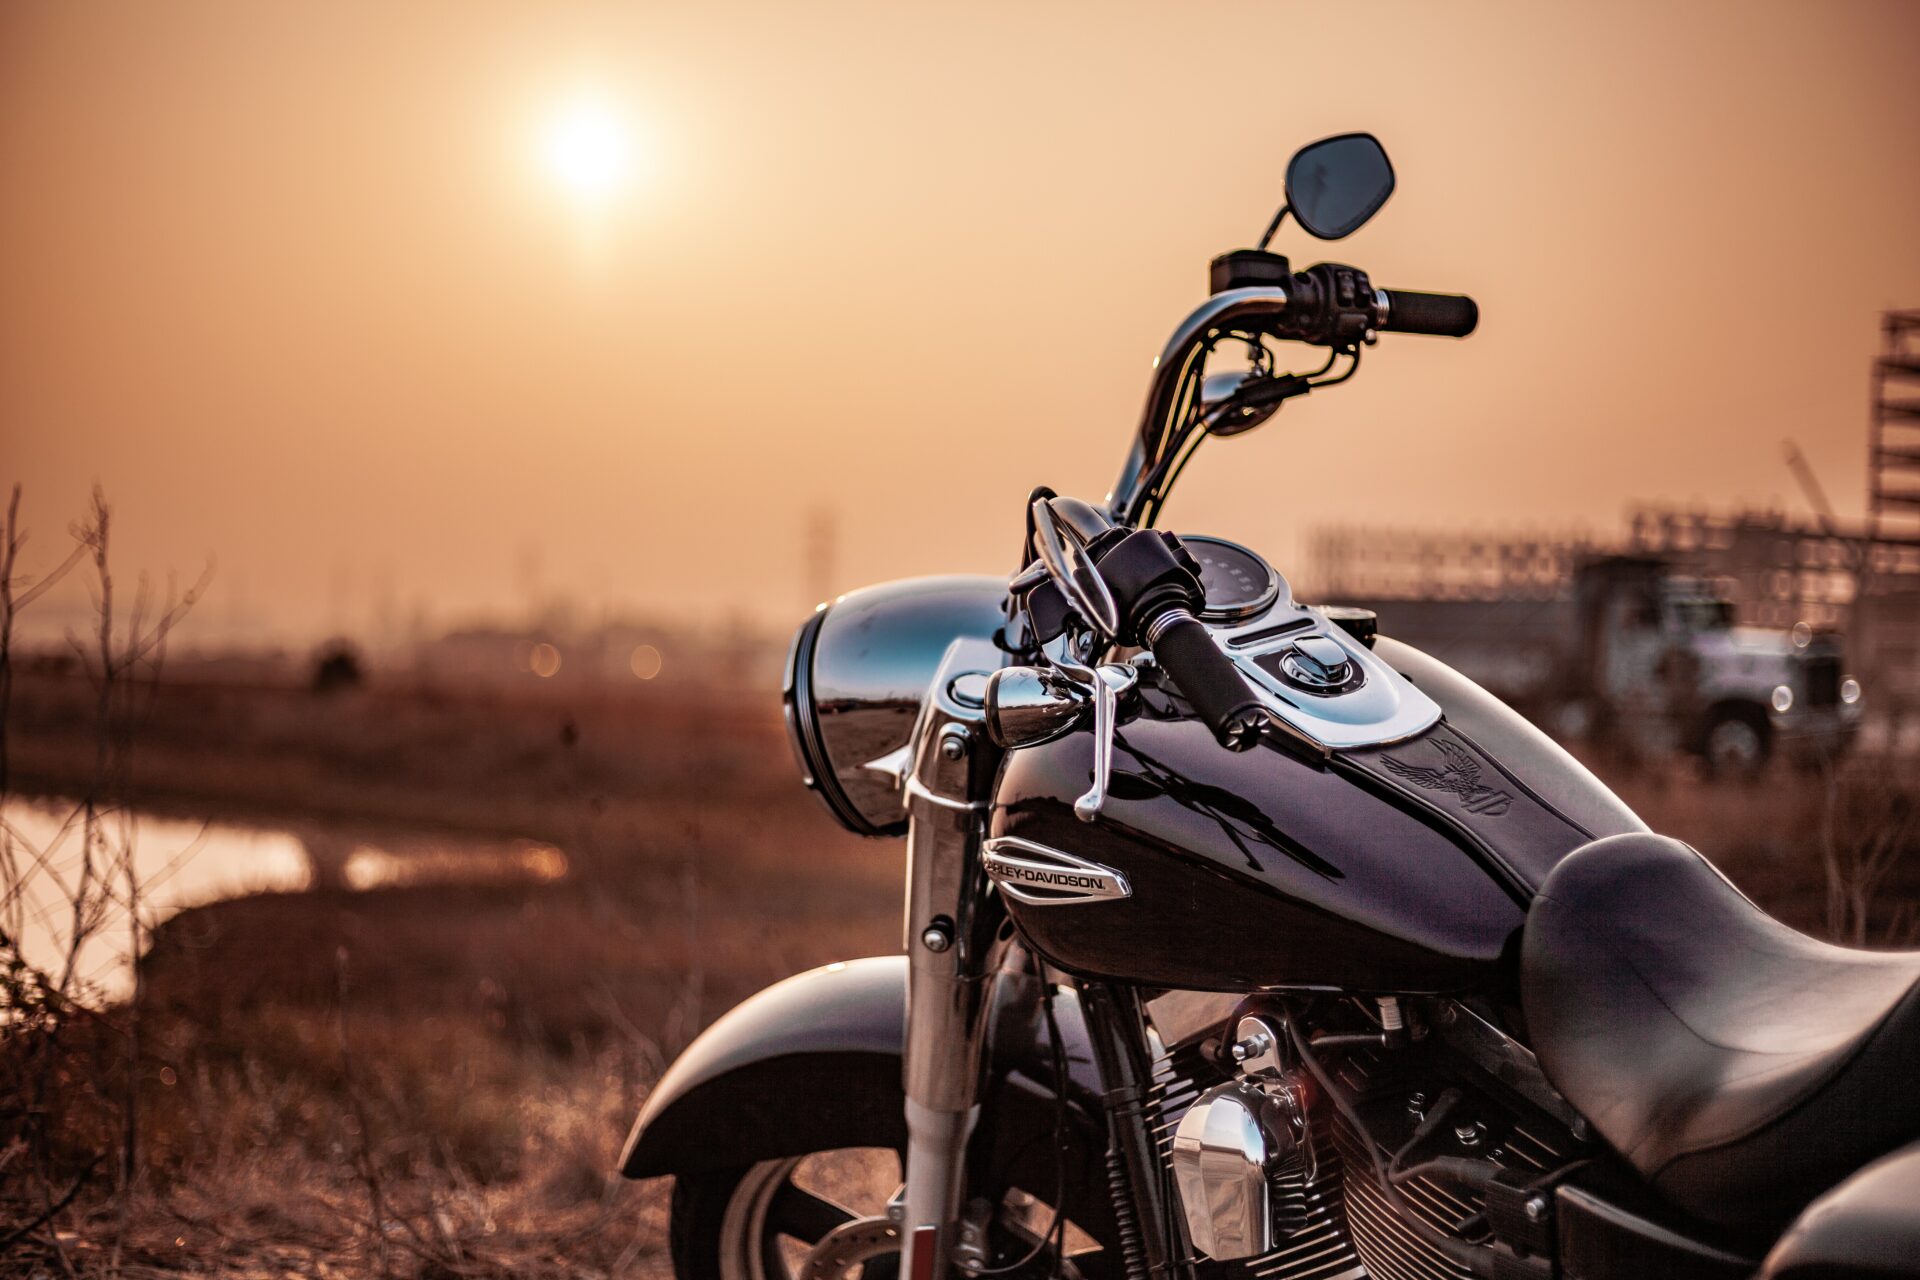  A motorcycle parked on a rural road with a sunset in the background with the factors affecting insurance monthly premium.